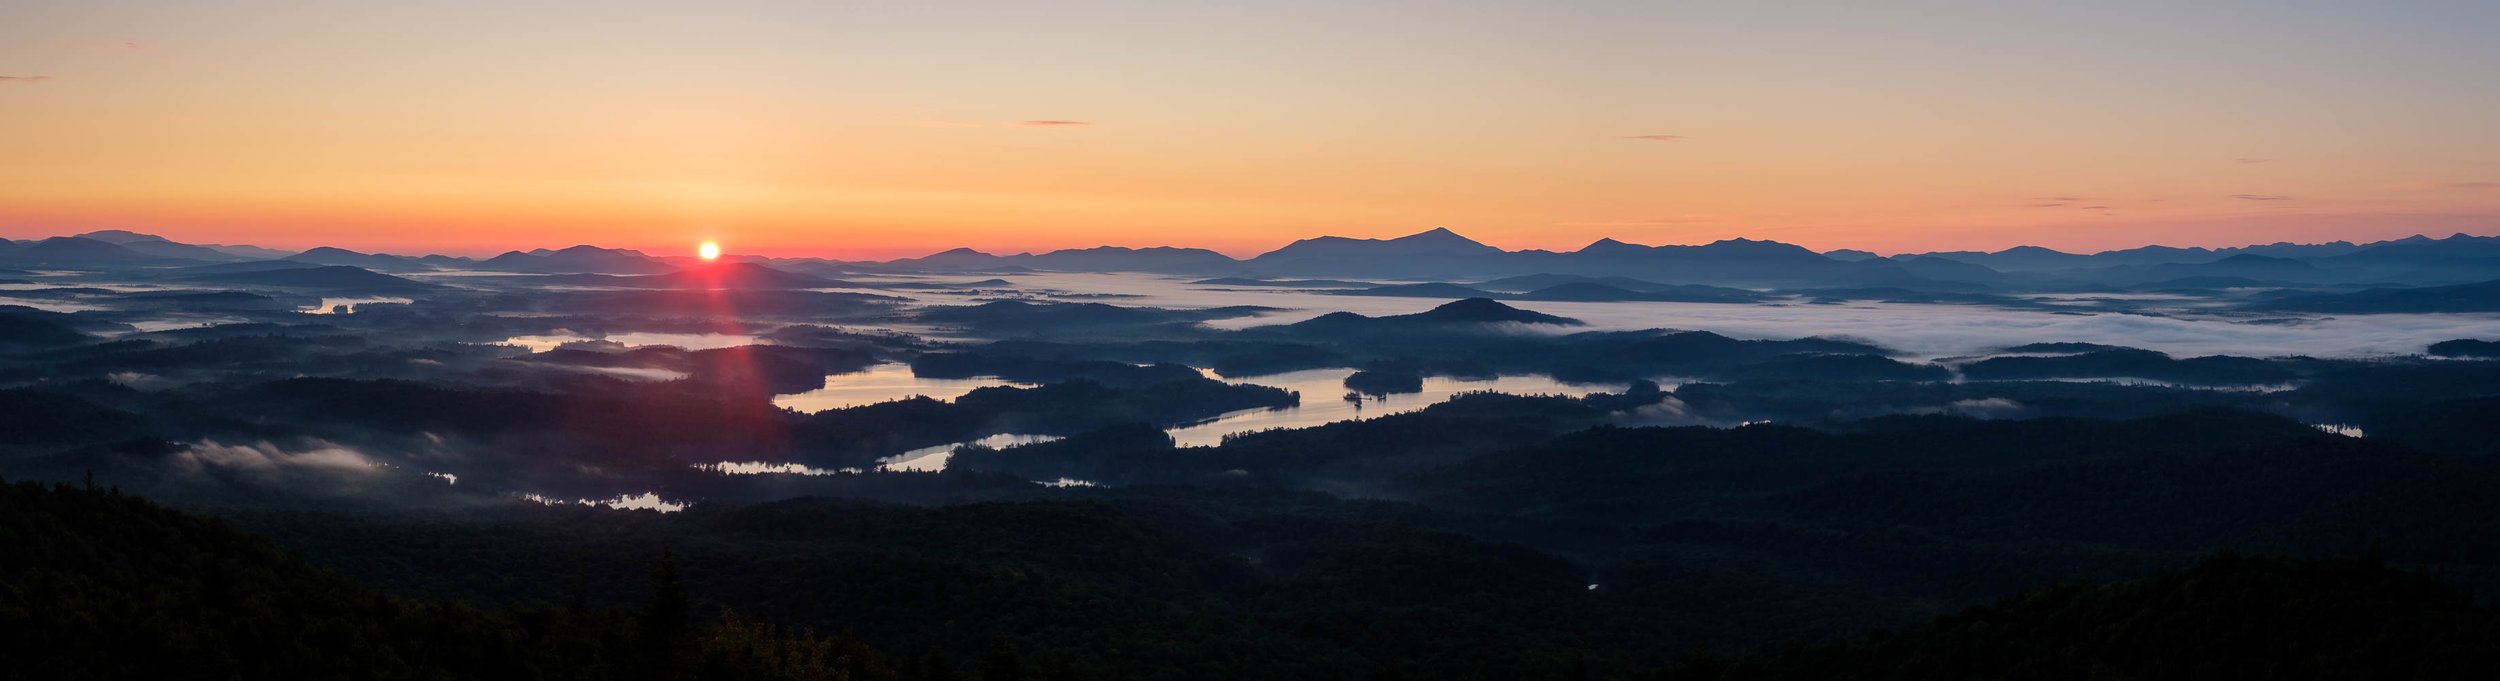  One of many stunning sunrises from Saint Regis Mountain in the Adirondacks of NY, August. 